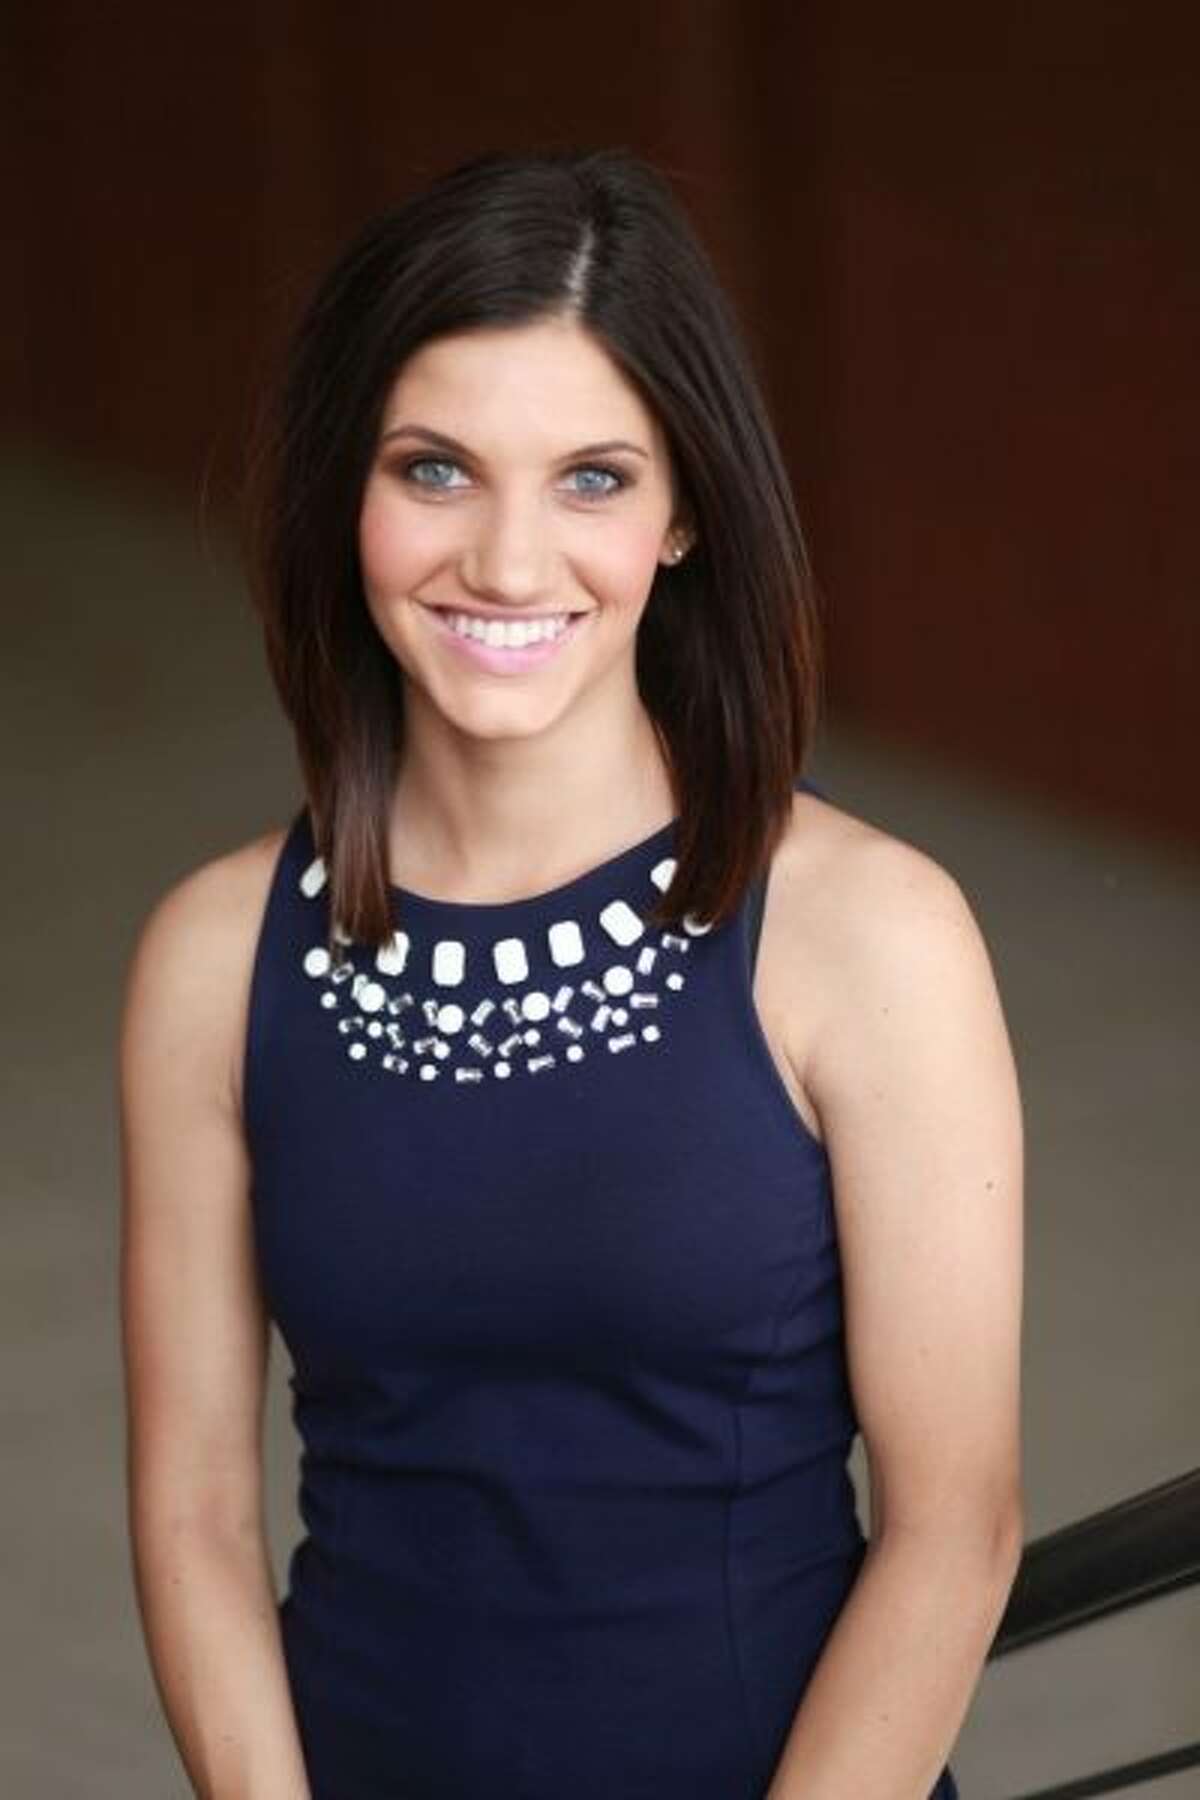 Click through the slideshow for 20 things you may not know about Alyssa Caroprese, meteorologist at CBS 6 Albany.